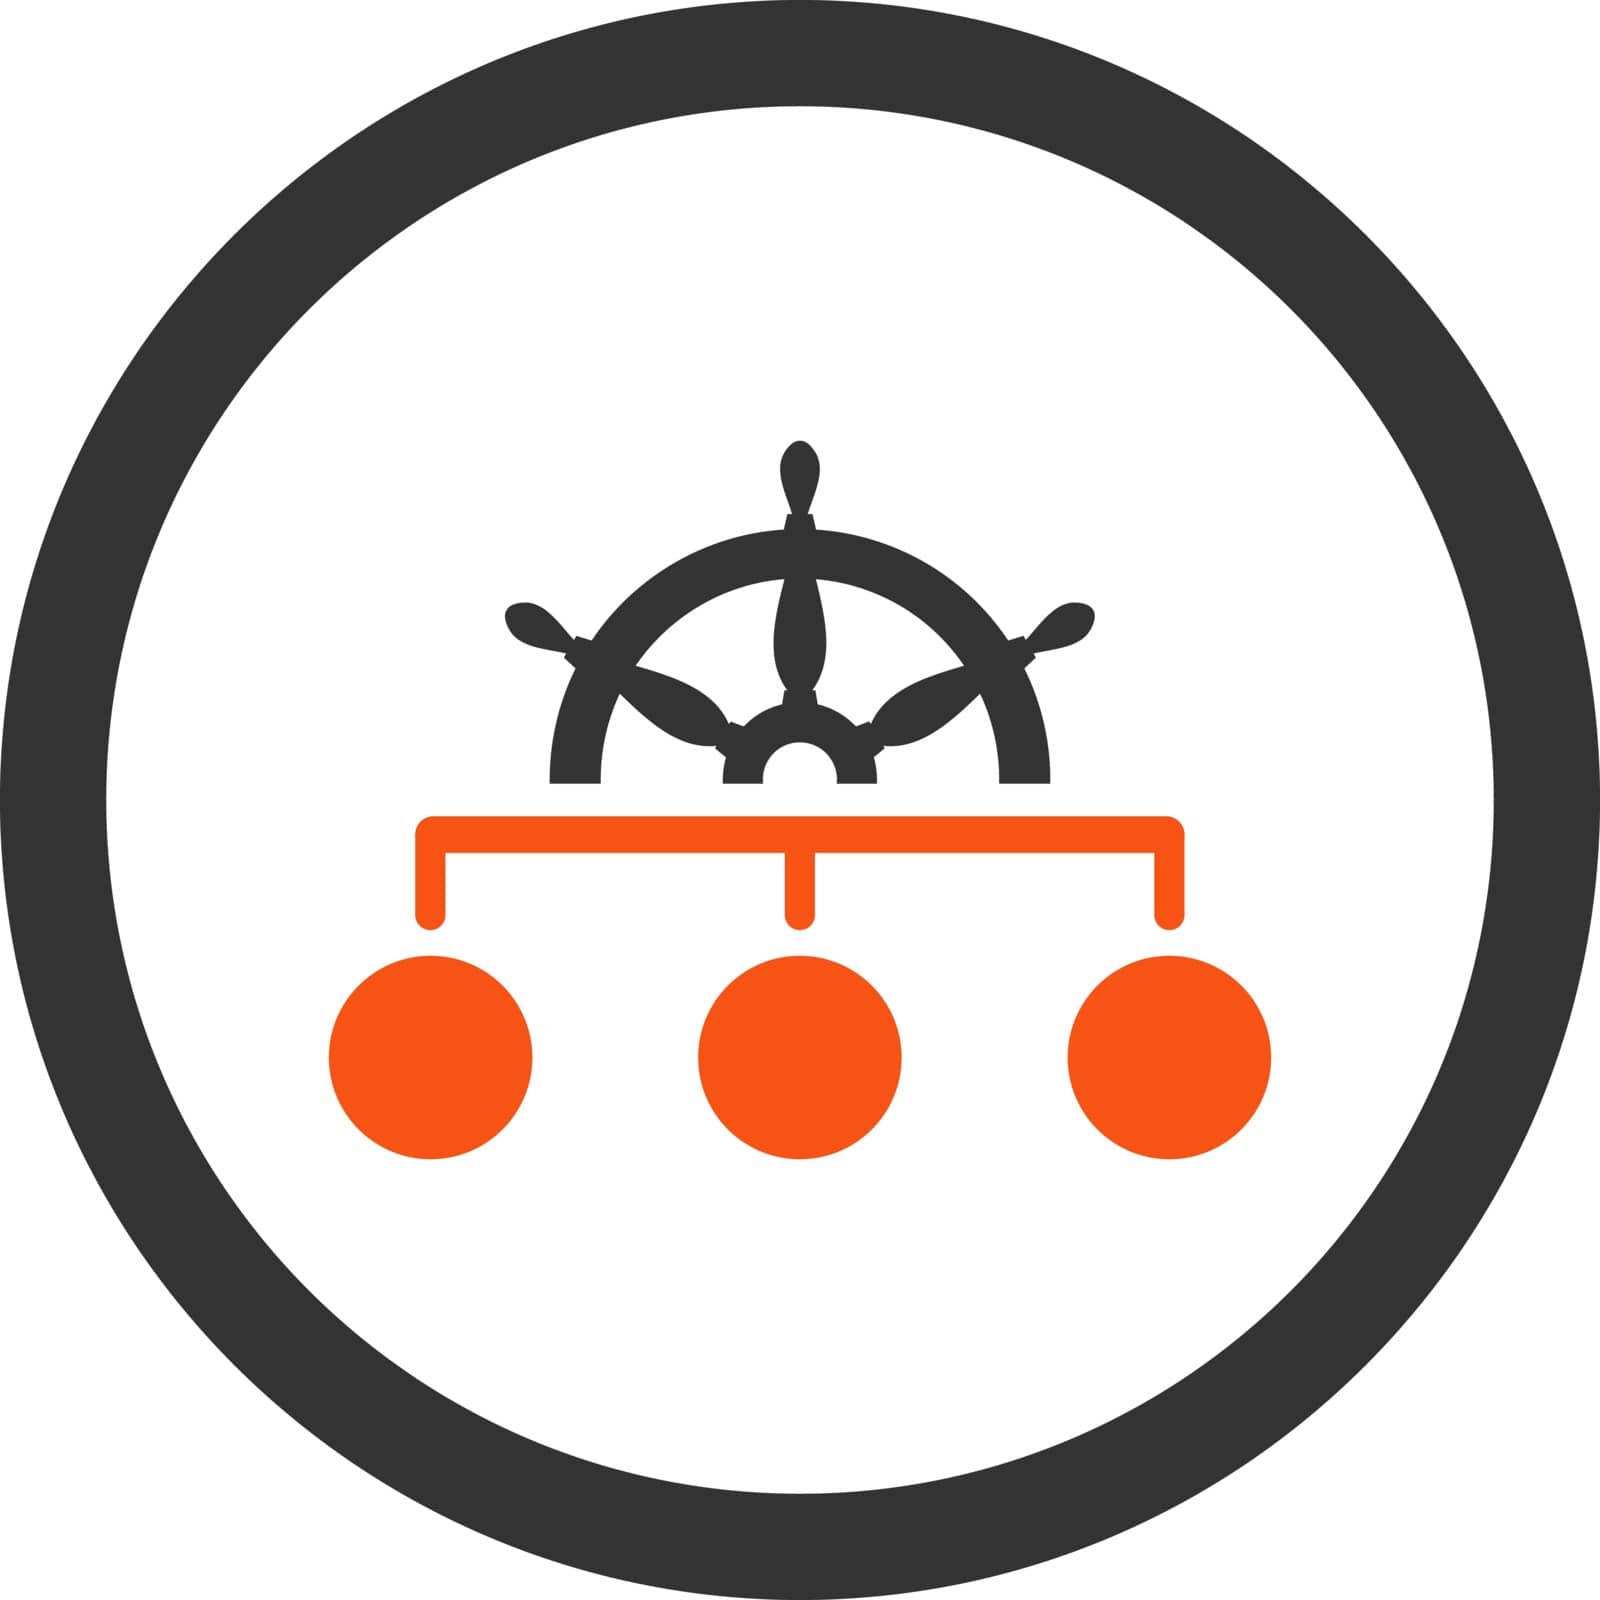 Rule vector icon. This rounded flat symbol is drawn with orange and gray colors on a white background.